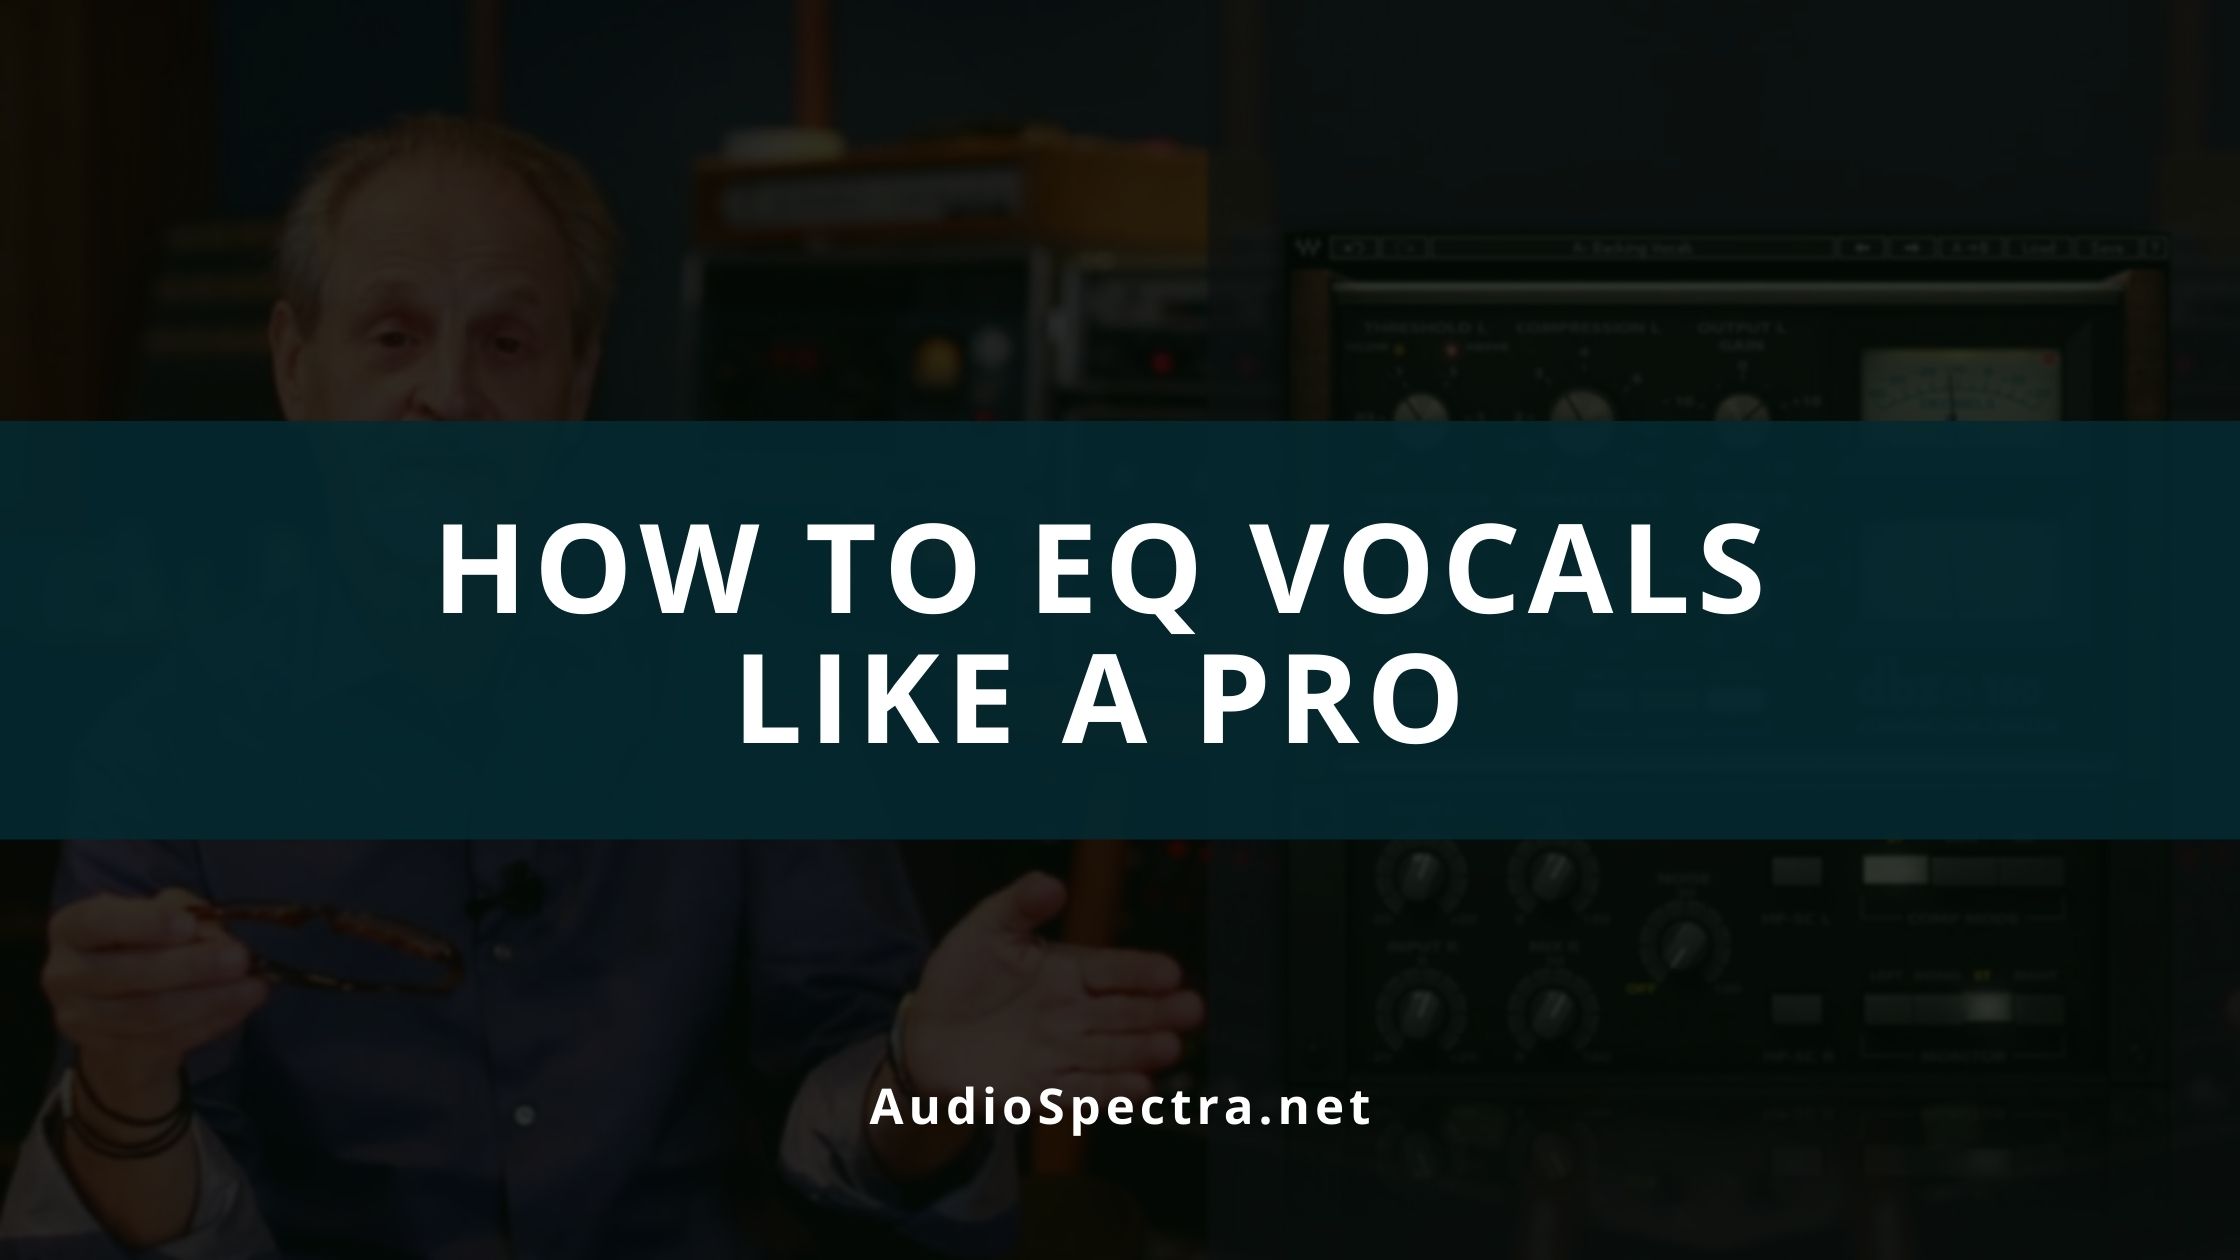 How To EQ Vocals Like A Pro